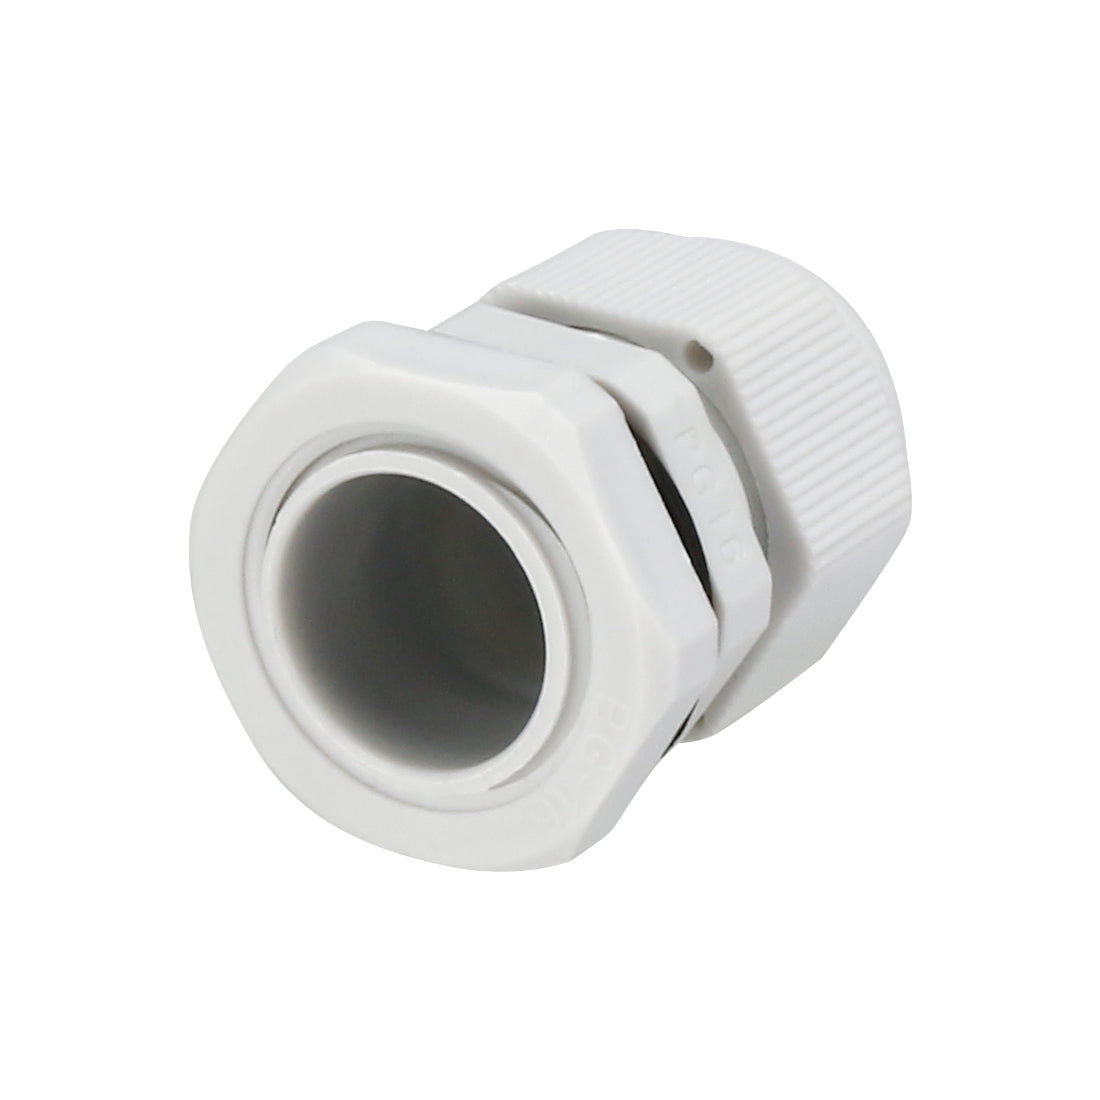 uxcell Uxcell 2Pcs PG16 Cable Gland Waterproof Plastic Joint Adjustable Locknut White for 10mm-13mm Dia Cable Wire